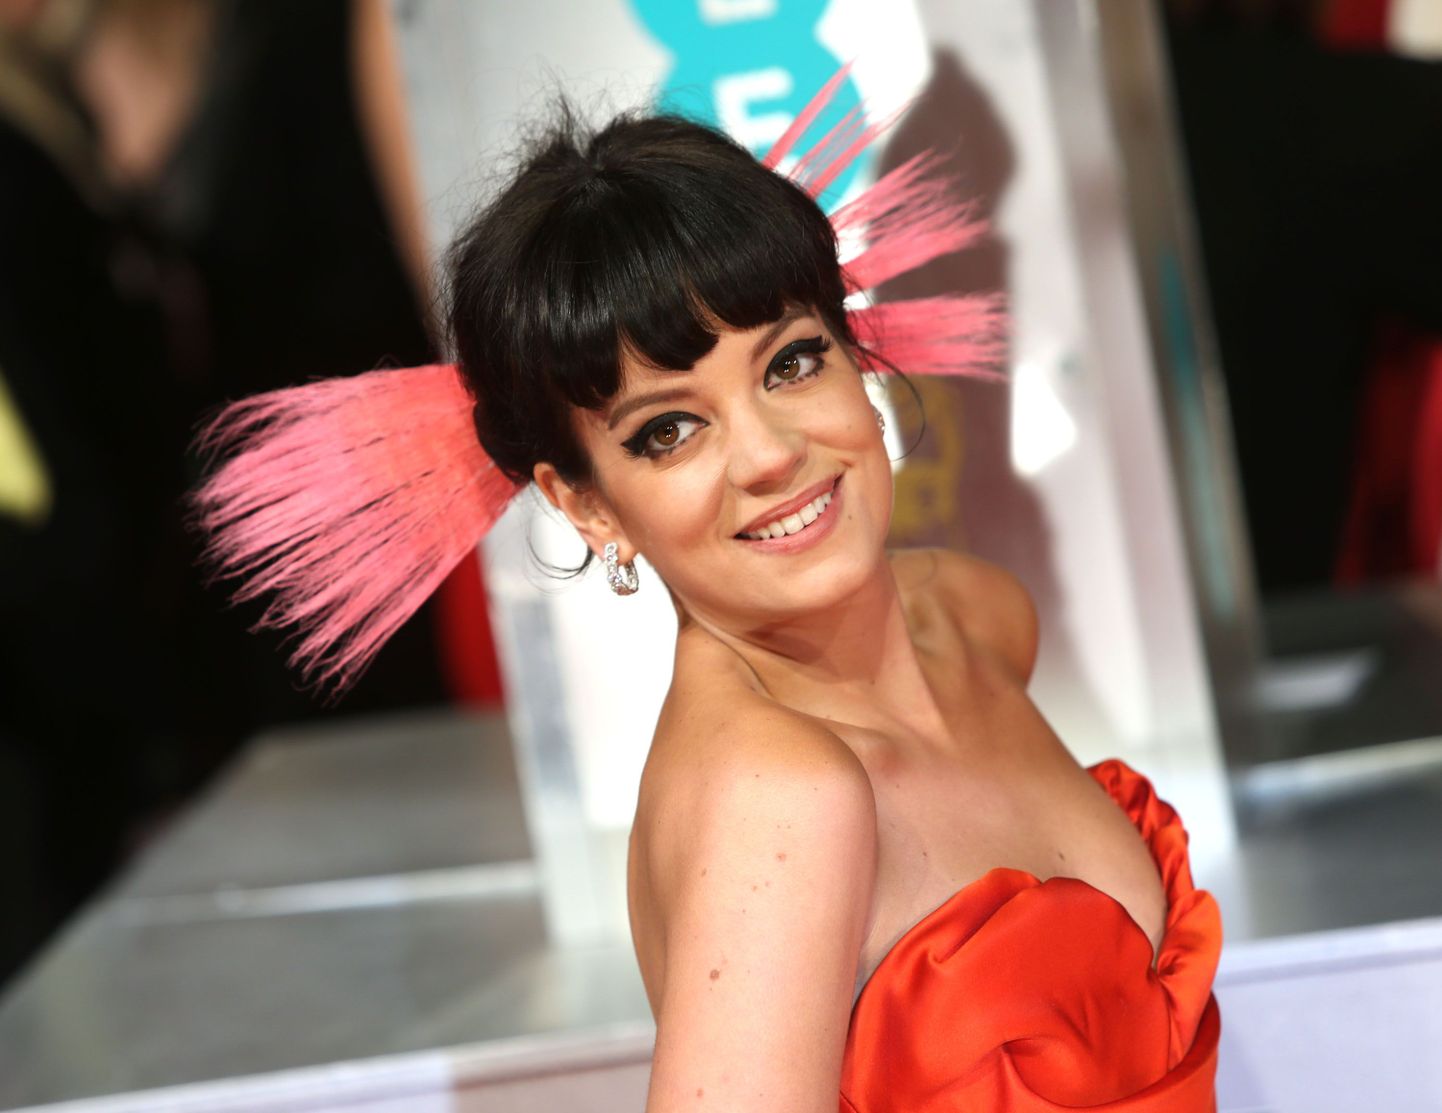 Singer Lily Allen poses for photographers on the red carpet at the EE British Academy Film Awards held at the Royal Opera House on Sunday Feb. 16, 2014, in London. (Photo by Joel Ryan/Invision/AP) / TT / kod 436